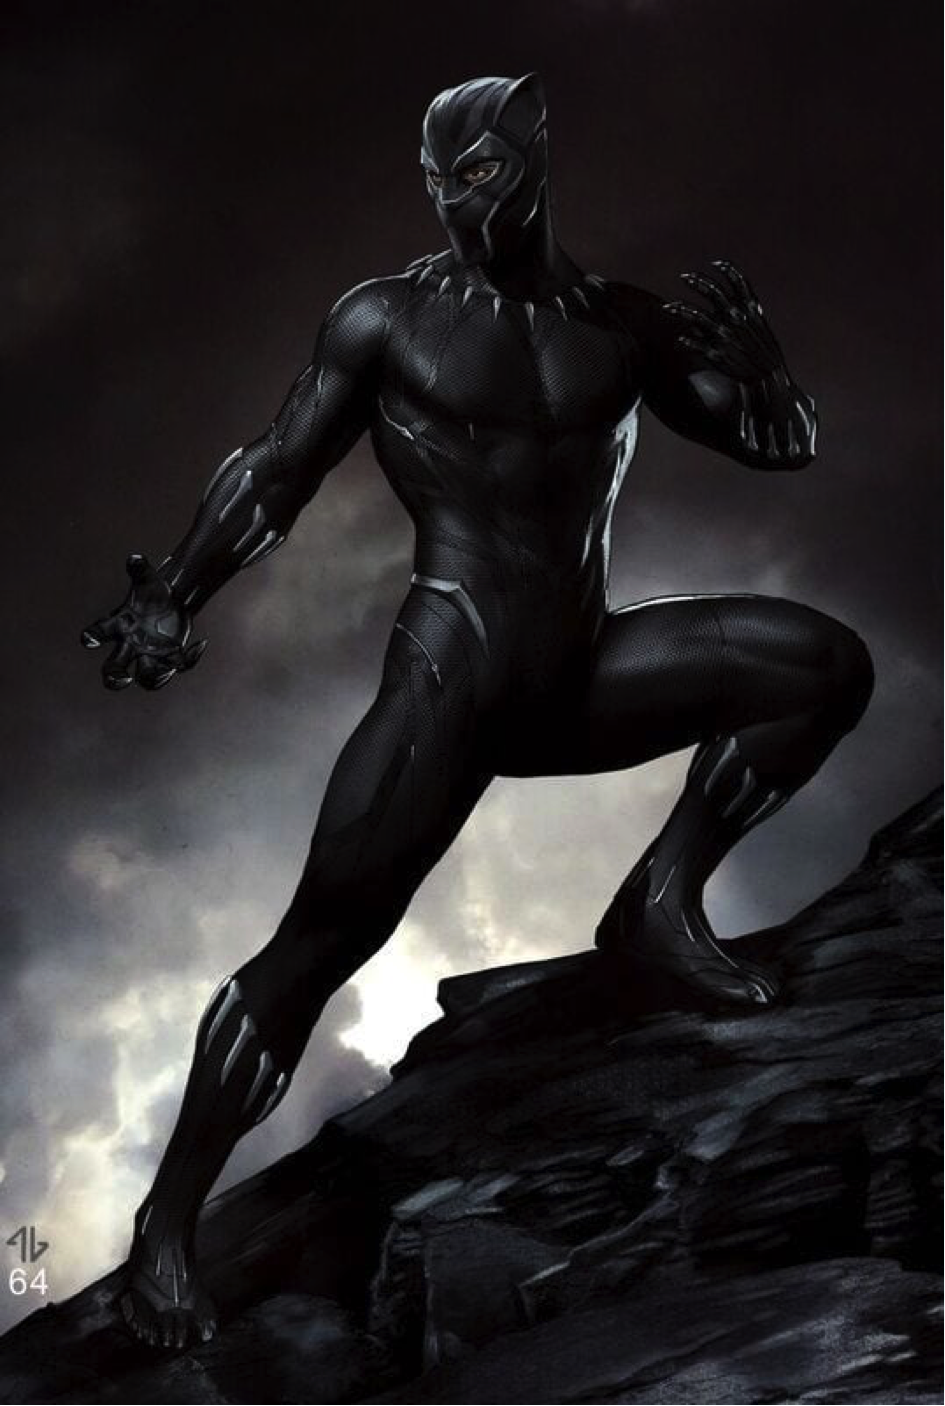 Disney/Marvel's concept art for the costume design of "The Black Panther."